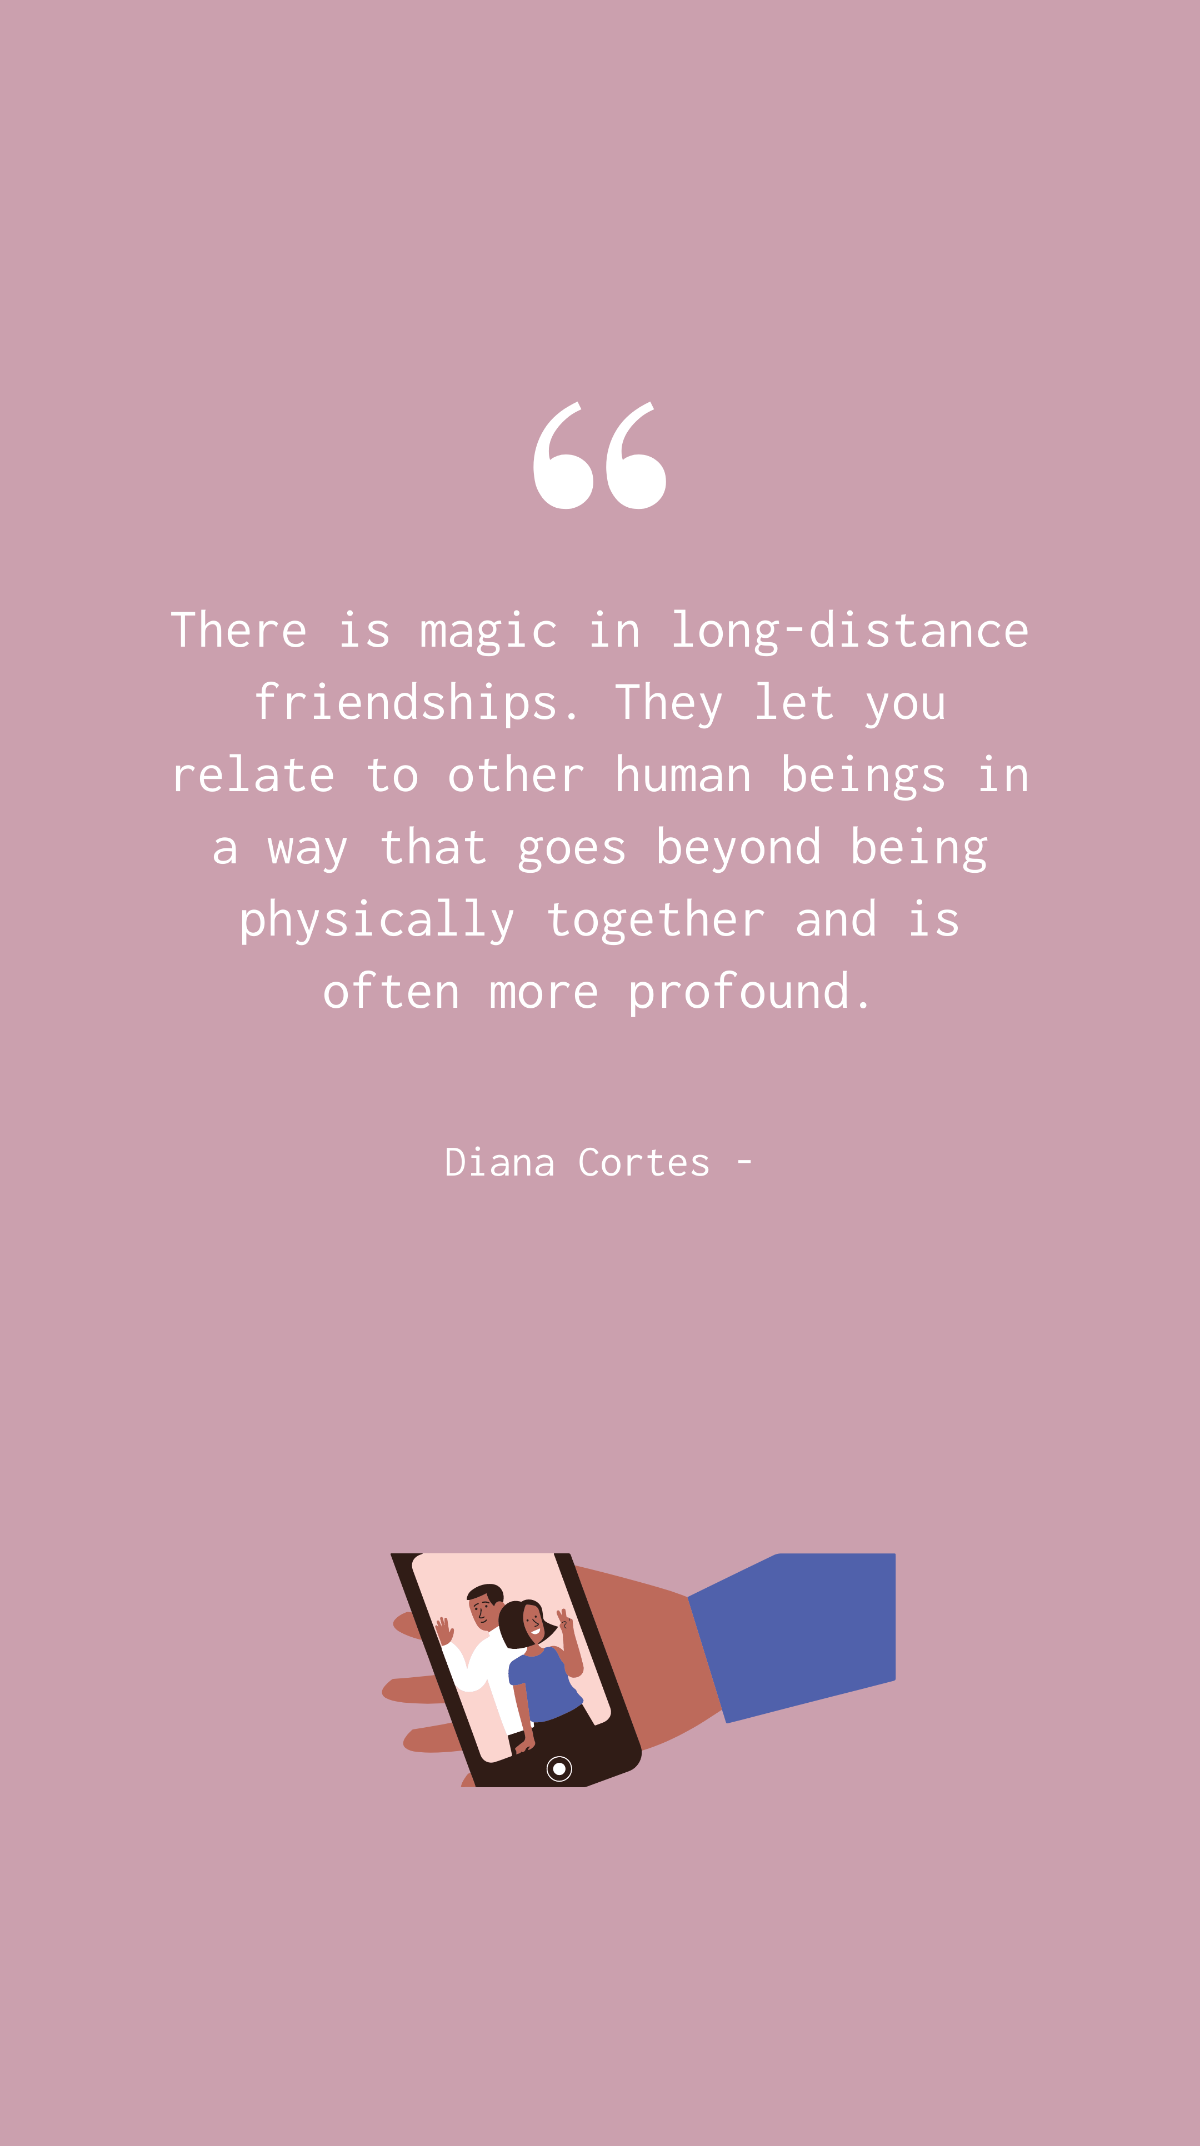 Diana Cortes - There is magic in long-distance friendships. They let you relate to other human beings in a way that goes beyond being physically together and is often more profound. Template